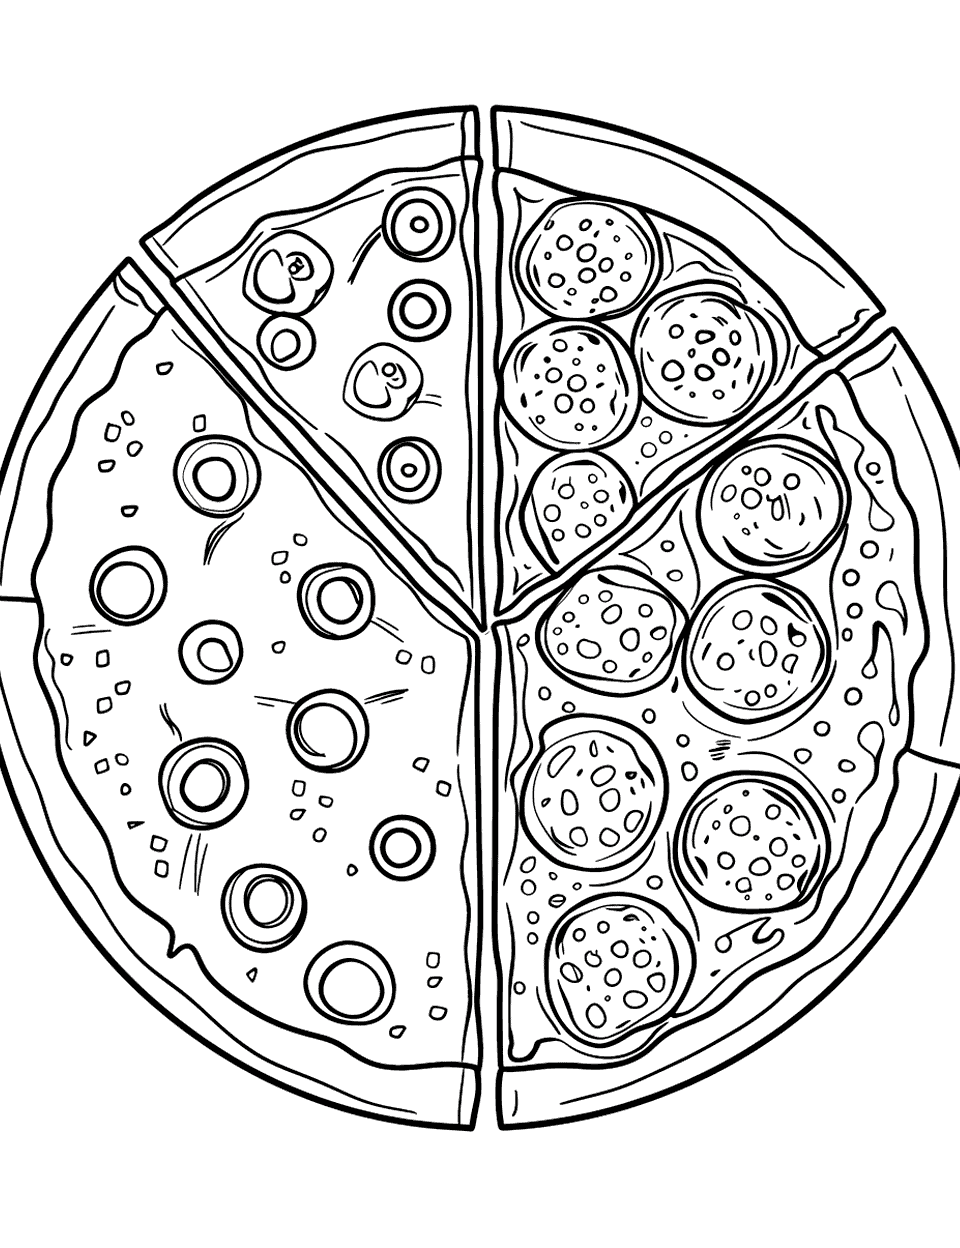 Half and Harmony Pizza Coloring Page - A pizza that is half cheese and half pepperoni, showing the contrast.